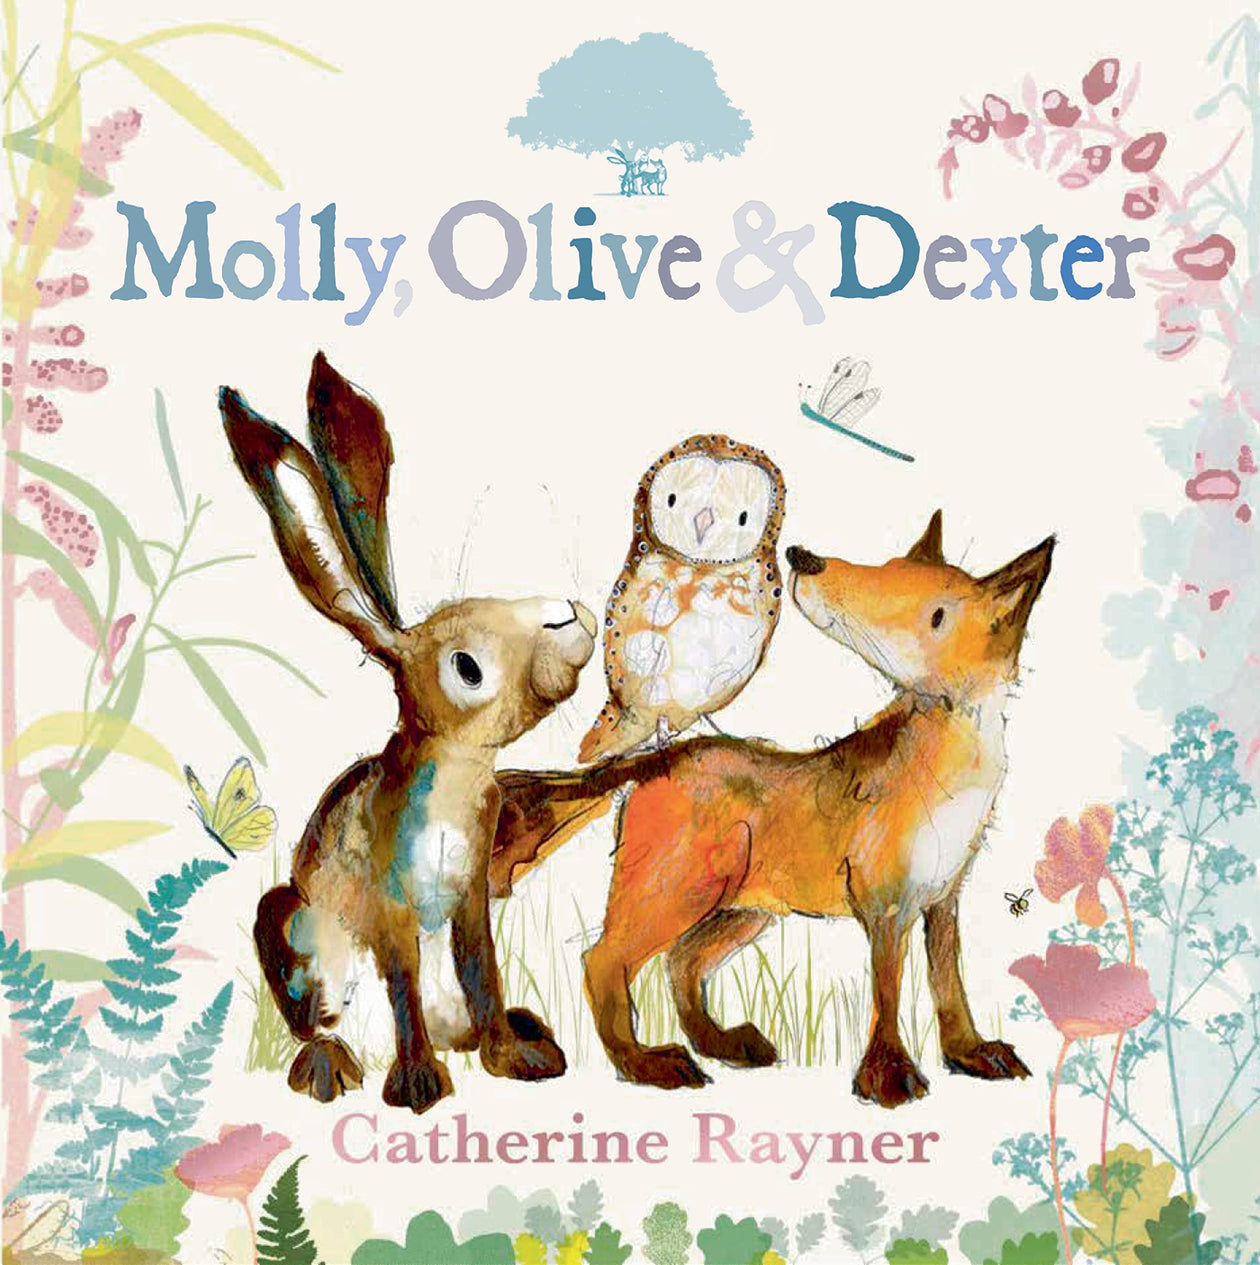 Catherine Rayner: Molly, Olive and Dexter